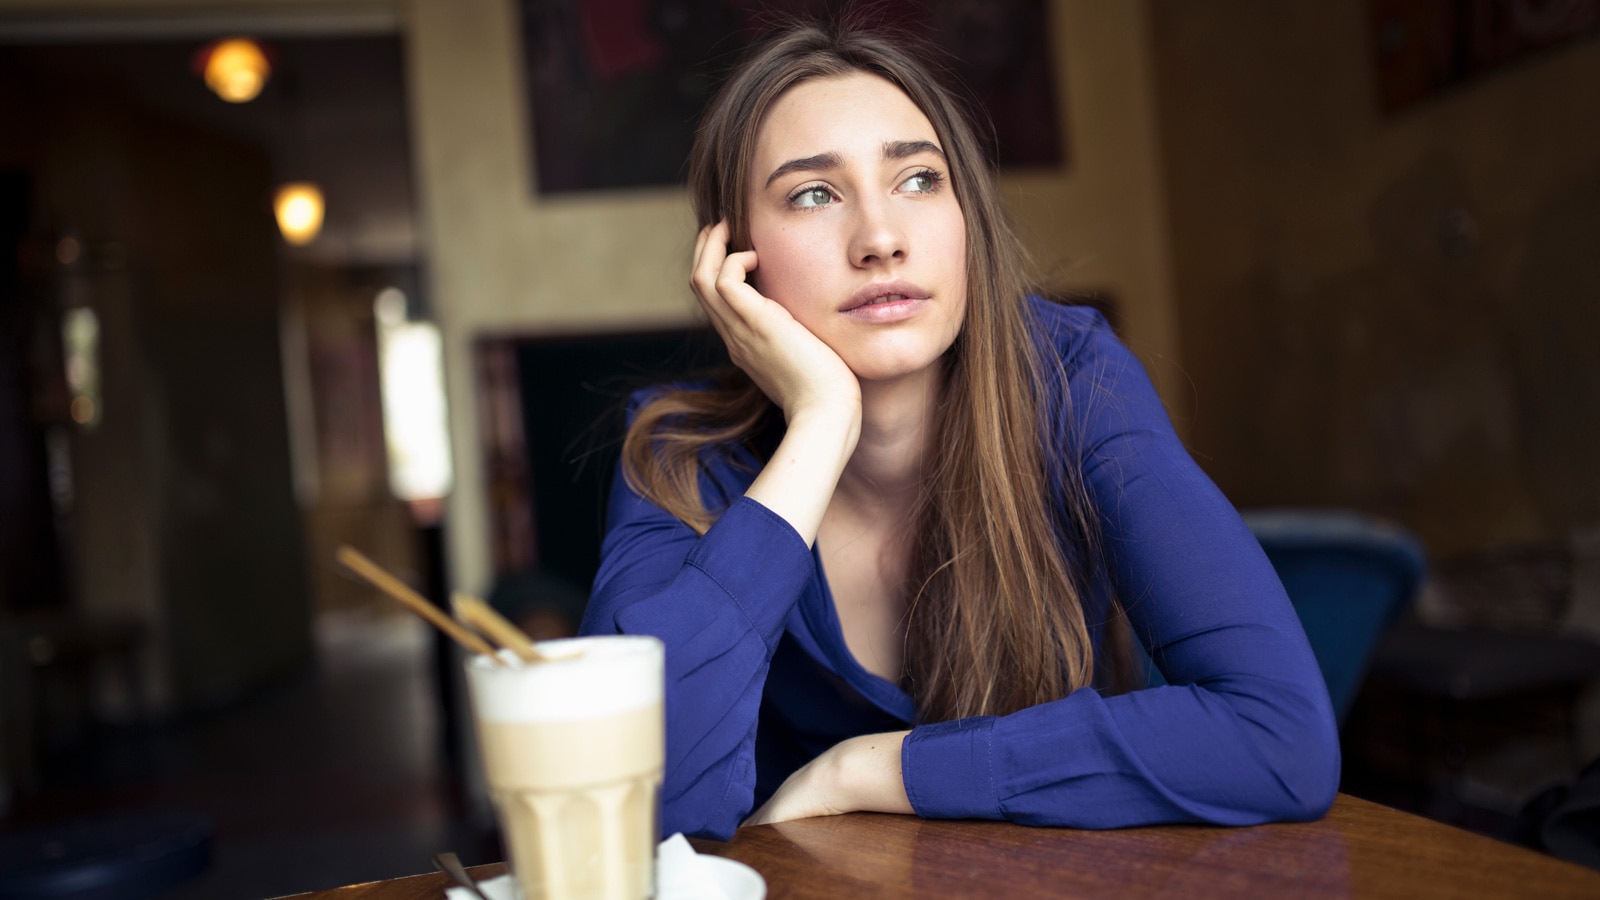 A woman sits at a cafe table looking out and resting her hand on her chin.